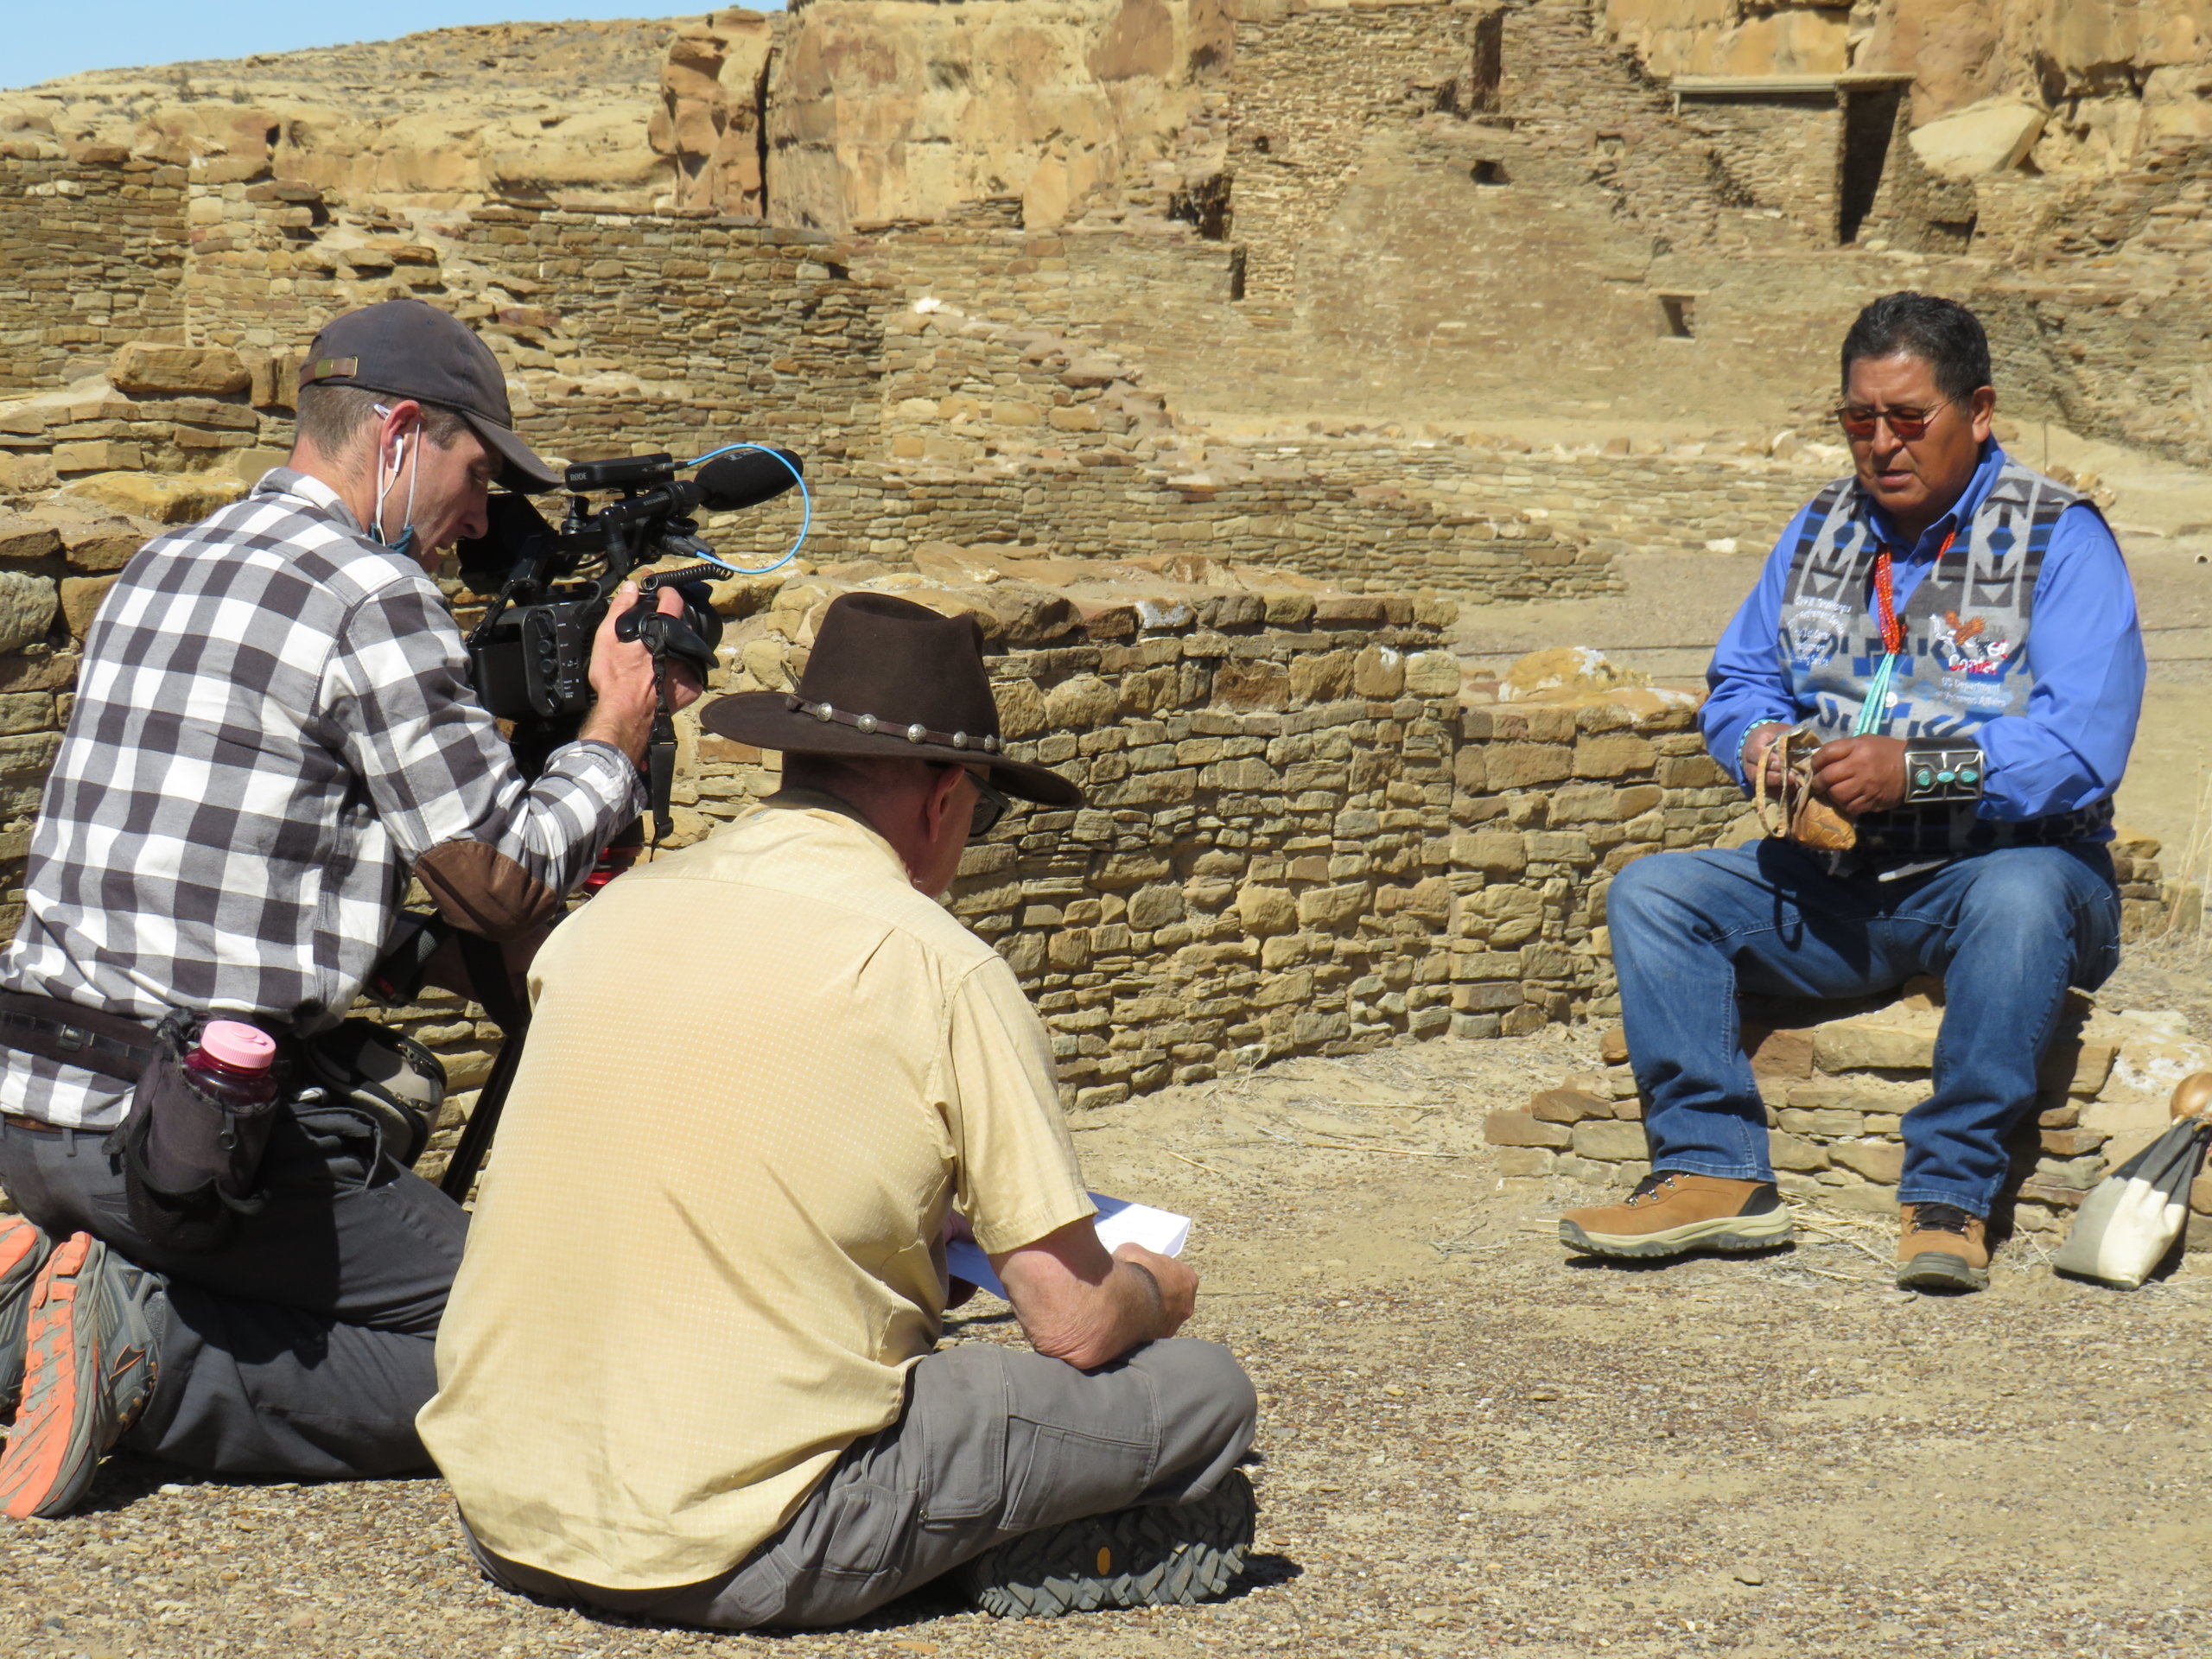 Upcoming short film highlights importance of Chaco